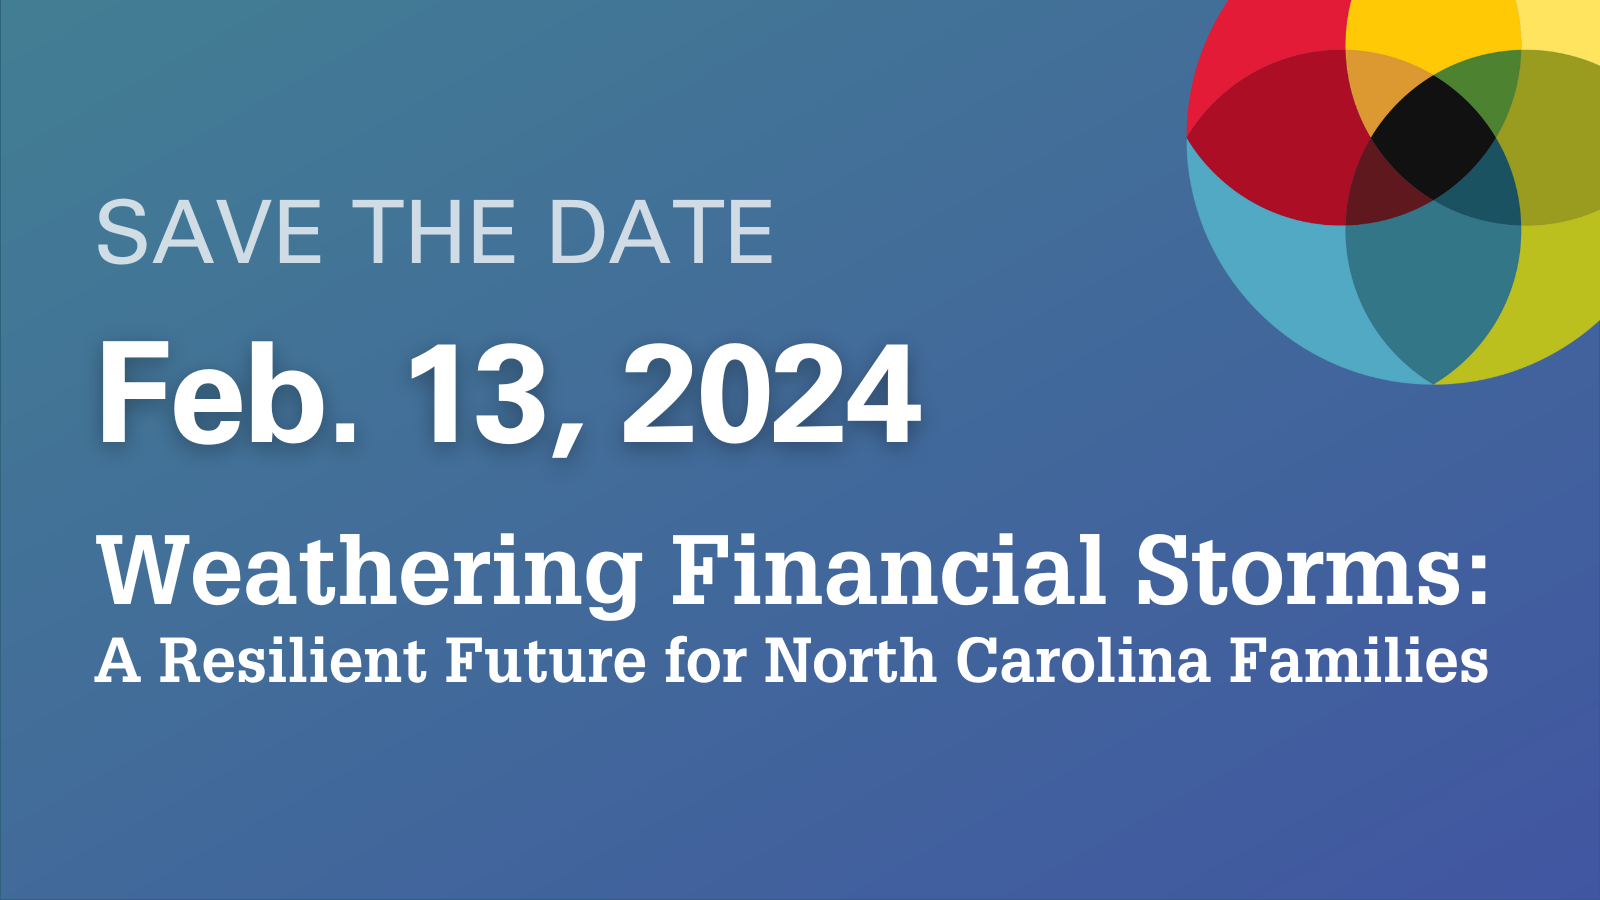 Save the date 2024 emerging issues forum, feb. 13, 2024